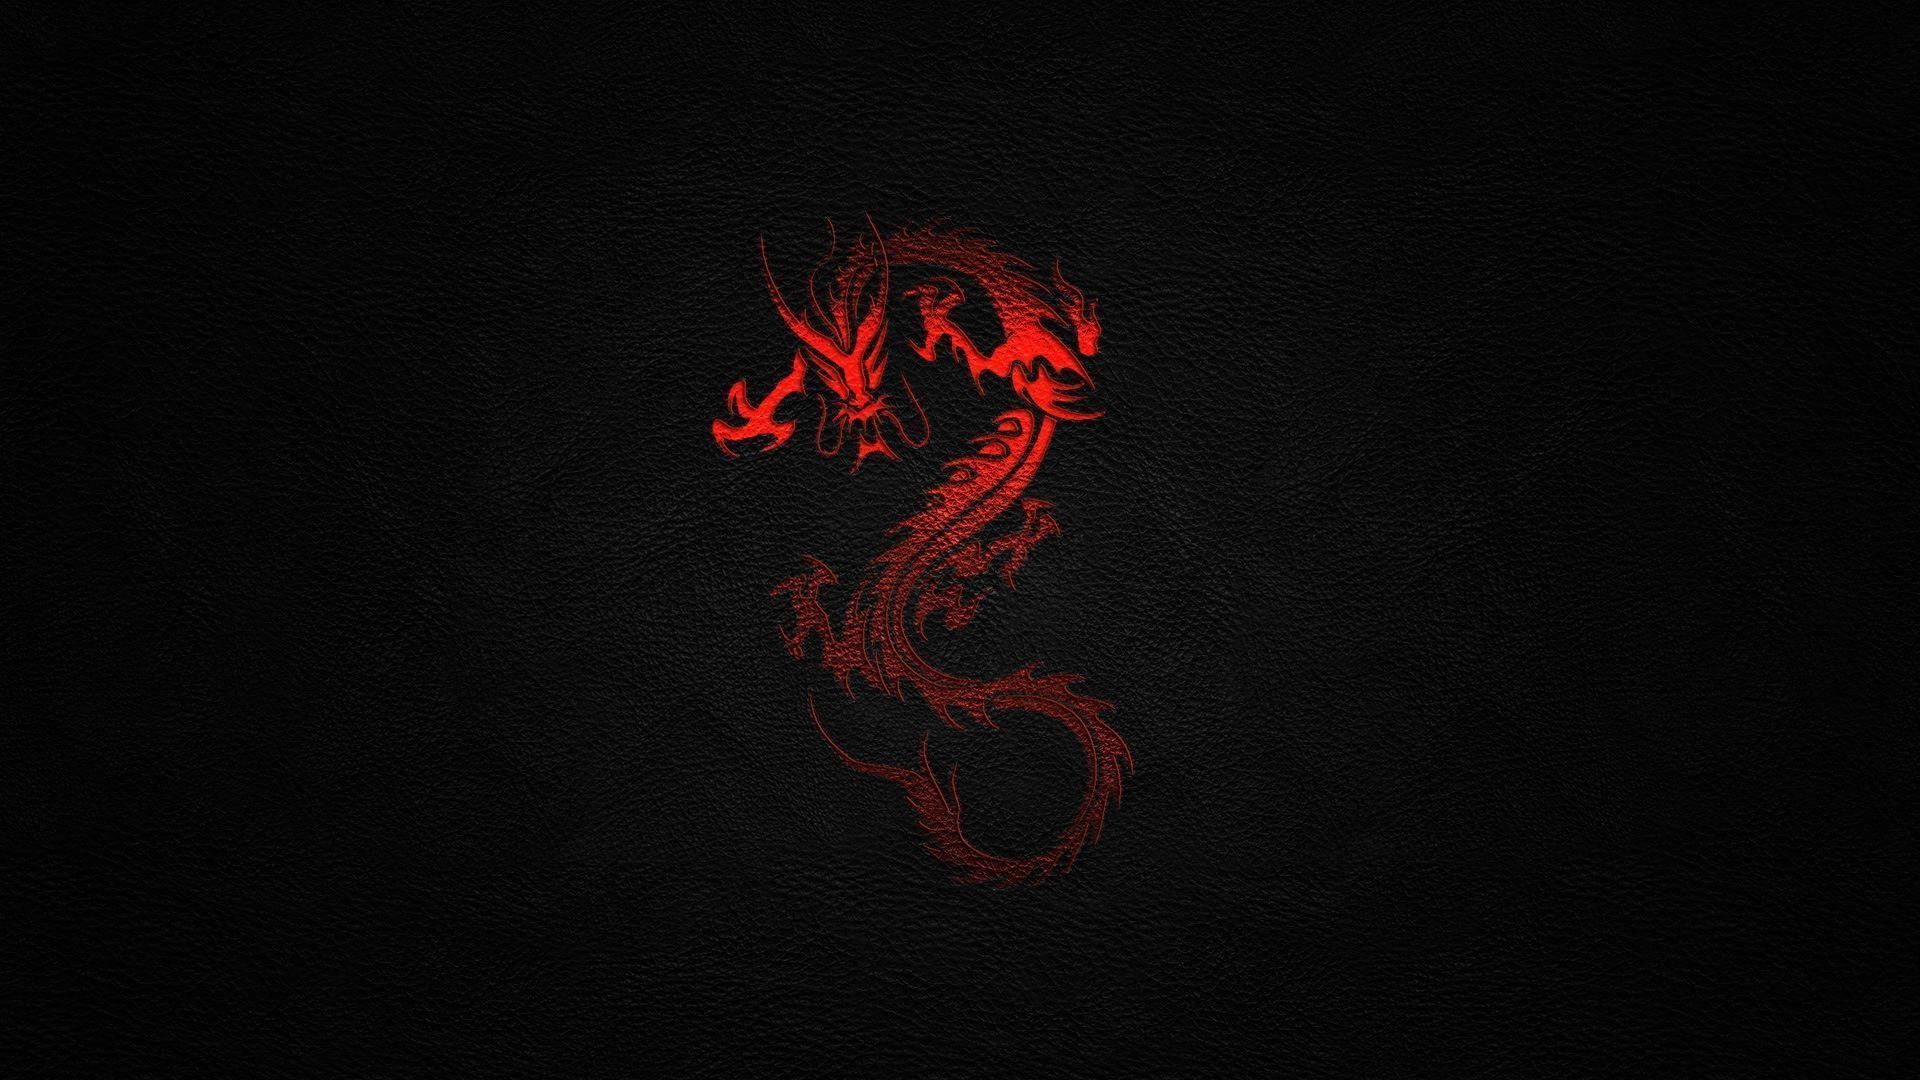 Dragon Aesthetic Wallpapers